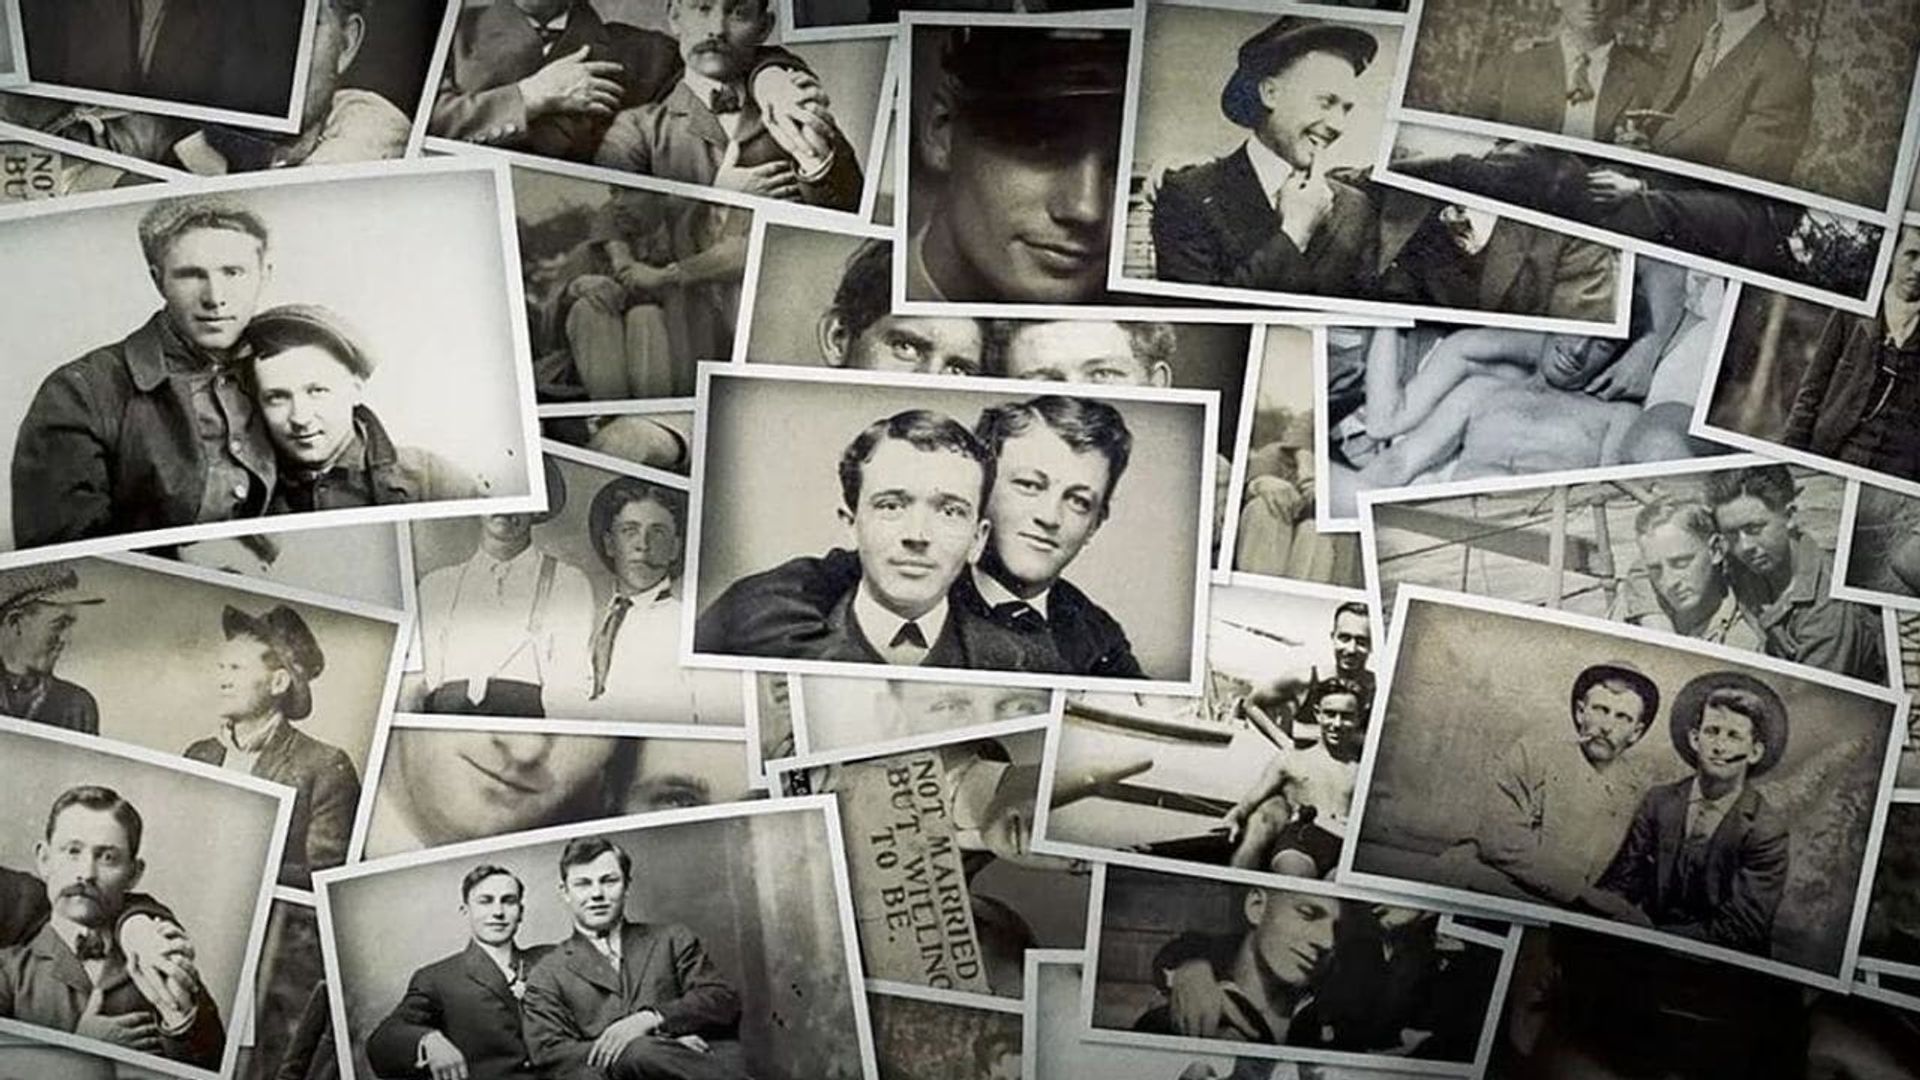 100 Years of Men in Love: The Accidental Collection background